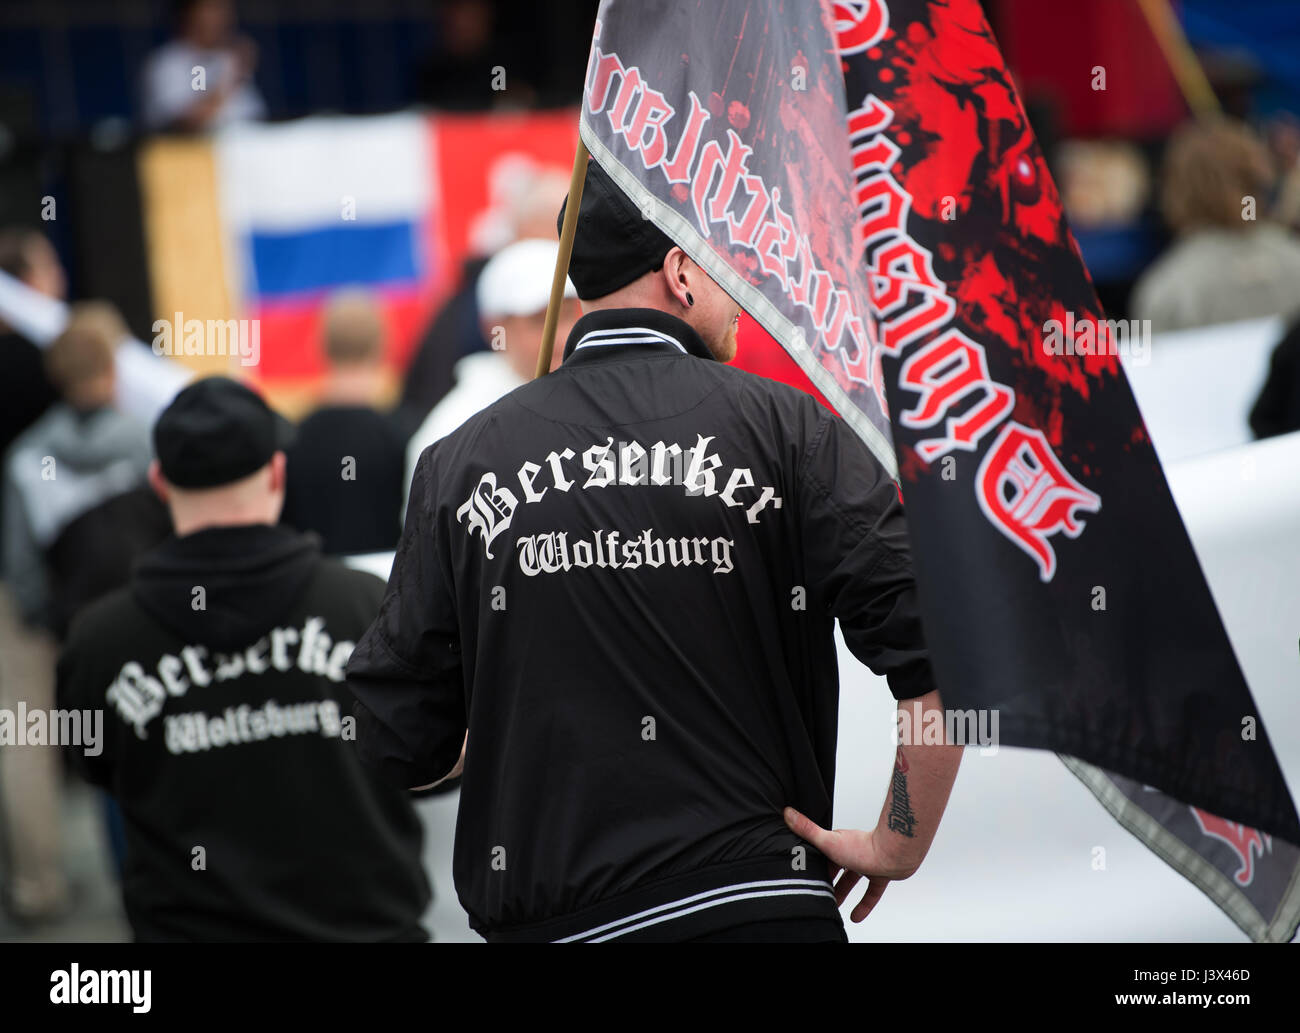 Dresden, Germany. 6th May, 2017. Participants at a pro-Le Pen demonstration wear 'Berserker Wolfsburg' jumpers in front of the Church of Our Lady in Dresden, Germany, 6 May 2017. Berserker Wolfsburg is an organisation with far-right and neo-fascist sympathies associated with the football hooligan scene. Photo: Arno Burgi/dpa-Zentralbild/dpa/Alamy Live News Stock Photo